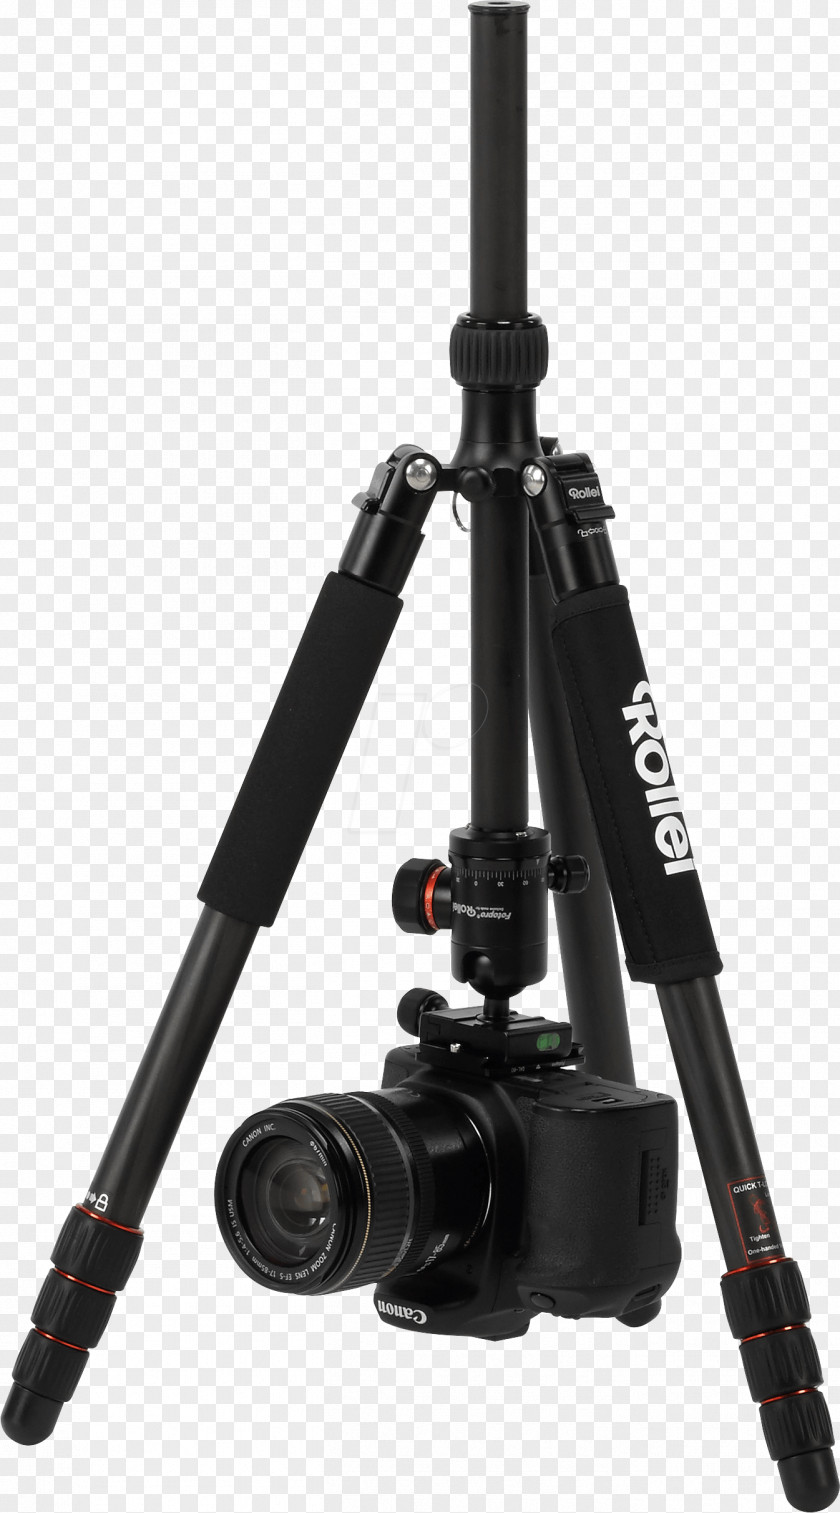 Tripod Camera Head Photography Rollei Prego Dp5500 5.0 MP Compact Digital Carbon Fiber Reinforced Polymer PNG